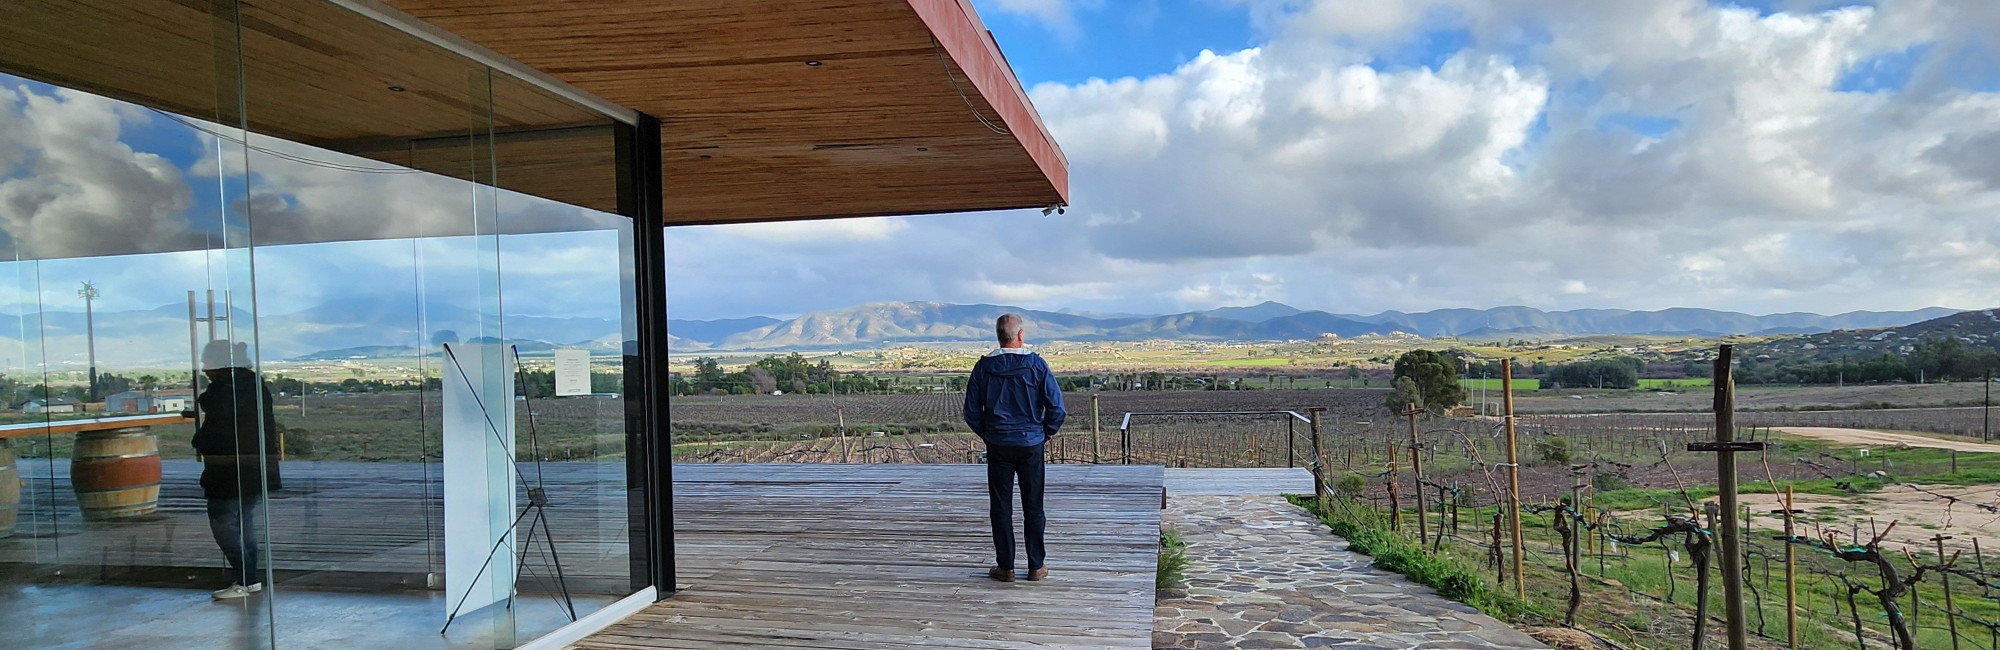 Valle de Guadalupe Itinerary